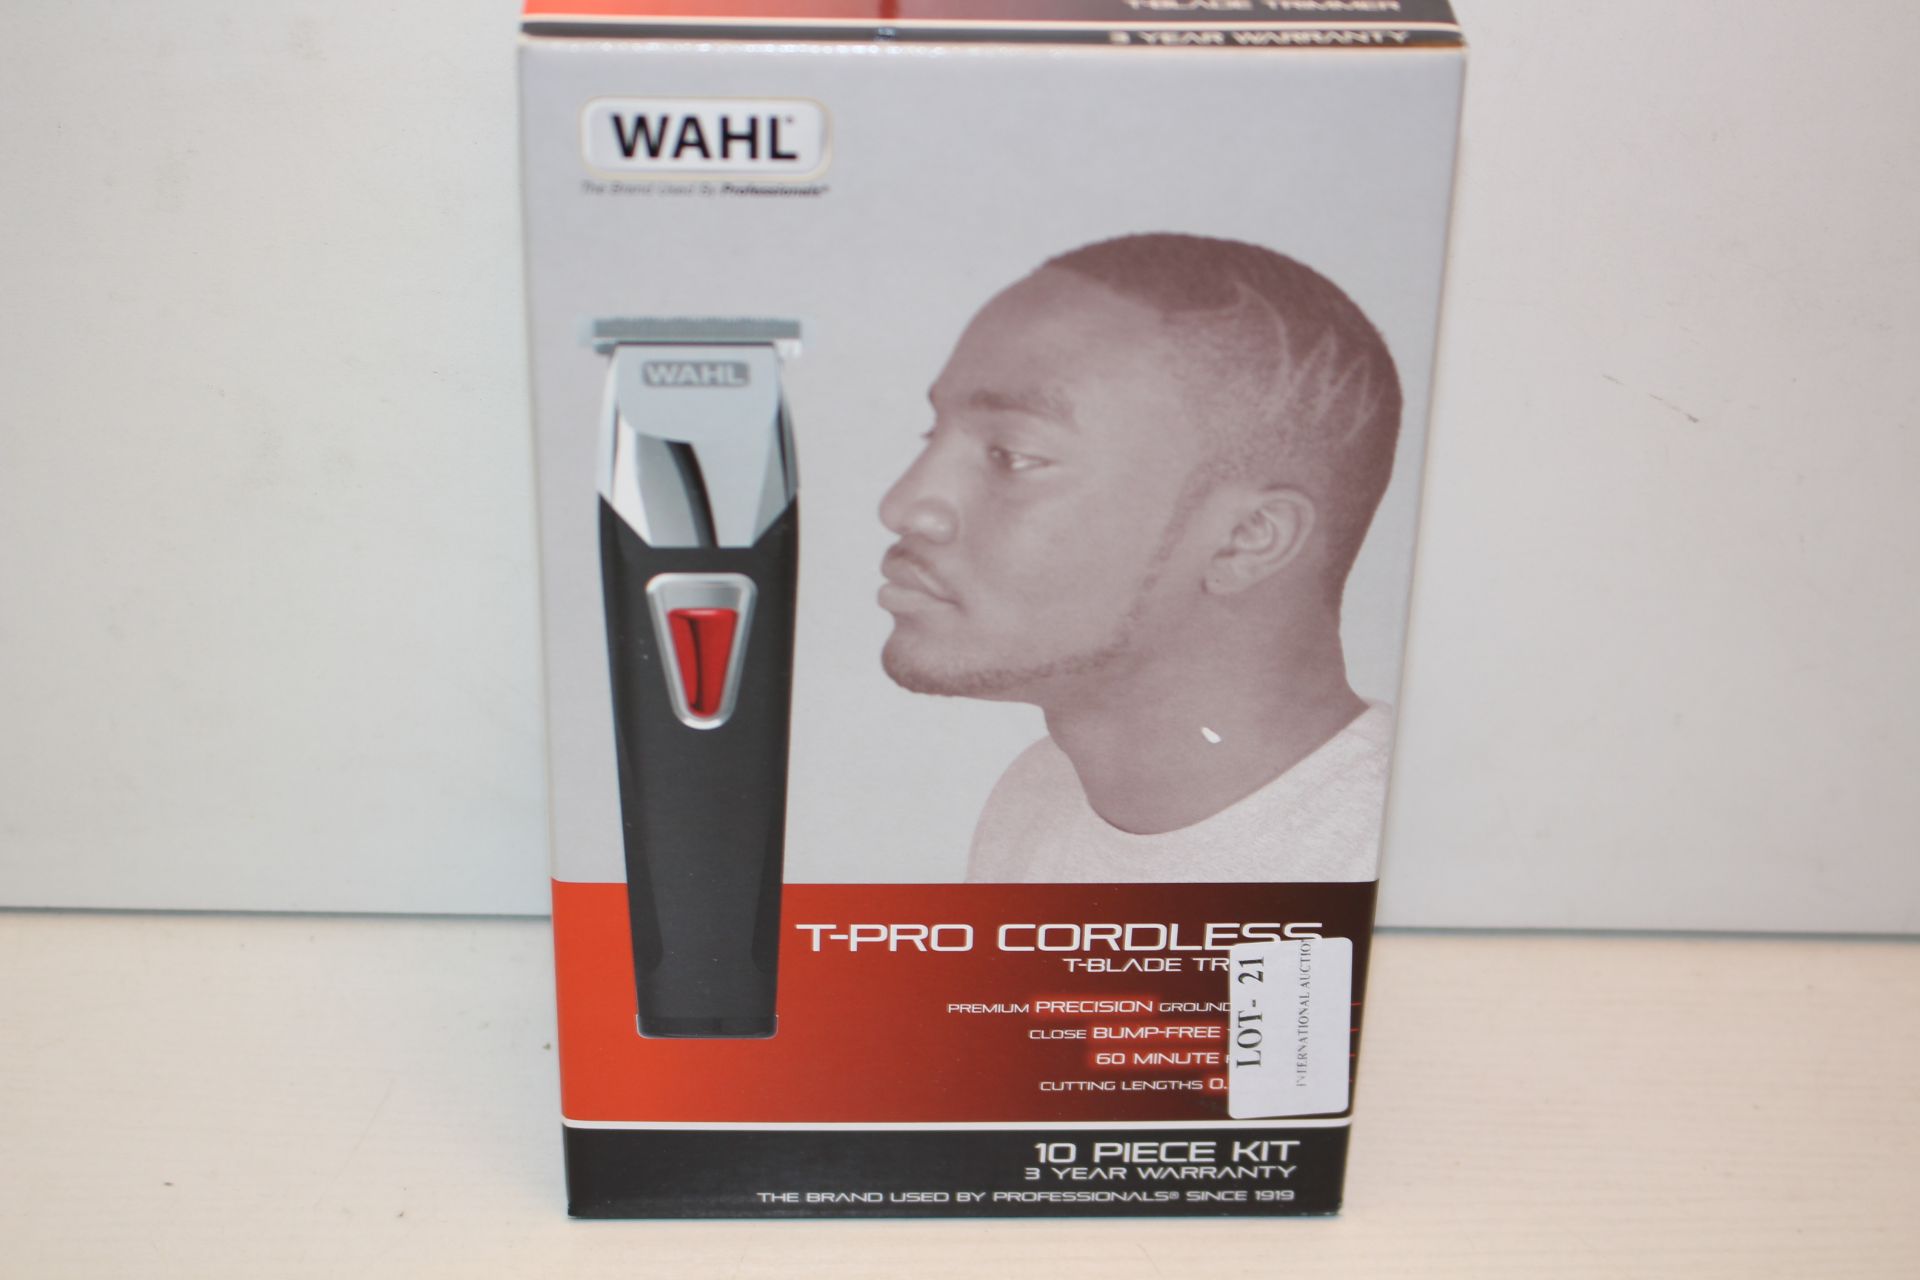 BOXED WAHL T-PRO CORDLESS T-BLADE TRIMMER RRP £59.99Condition ReportAppraisal Available on